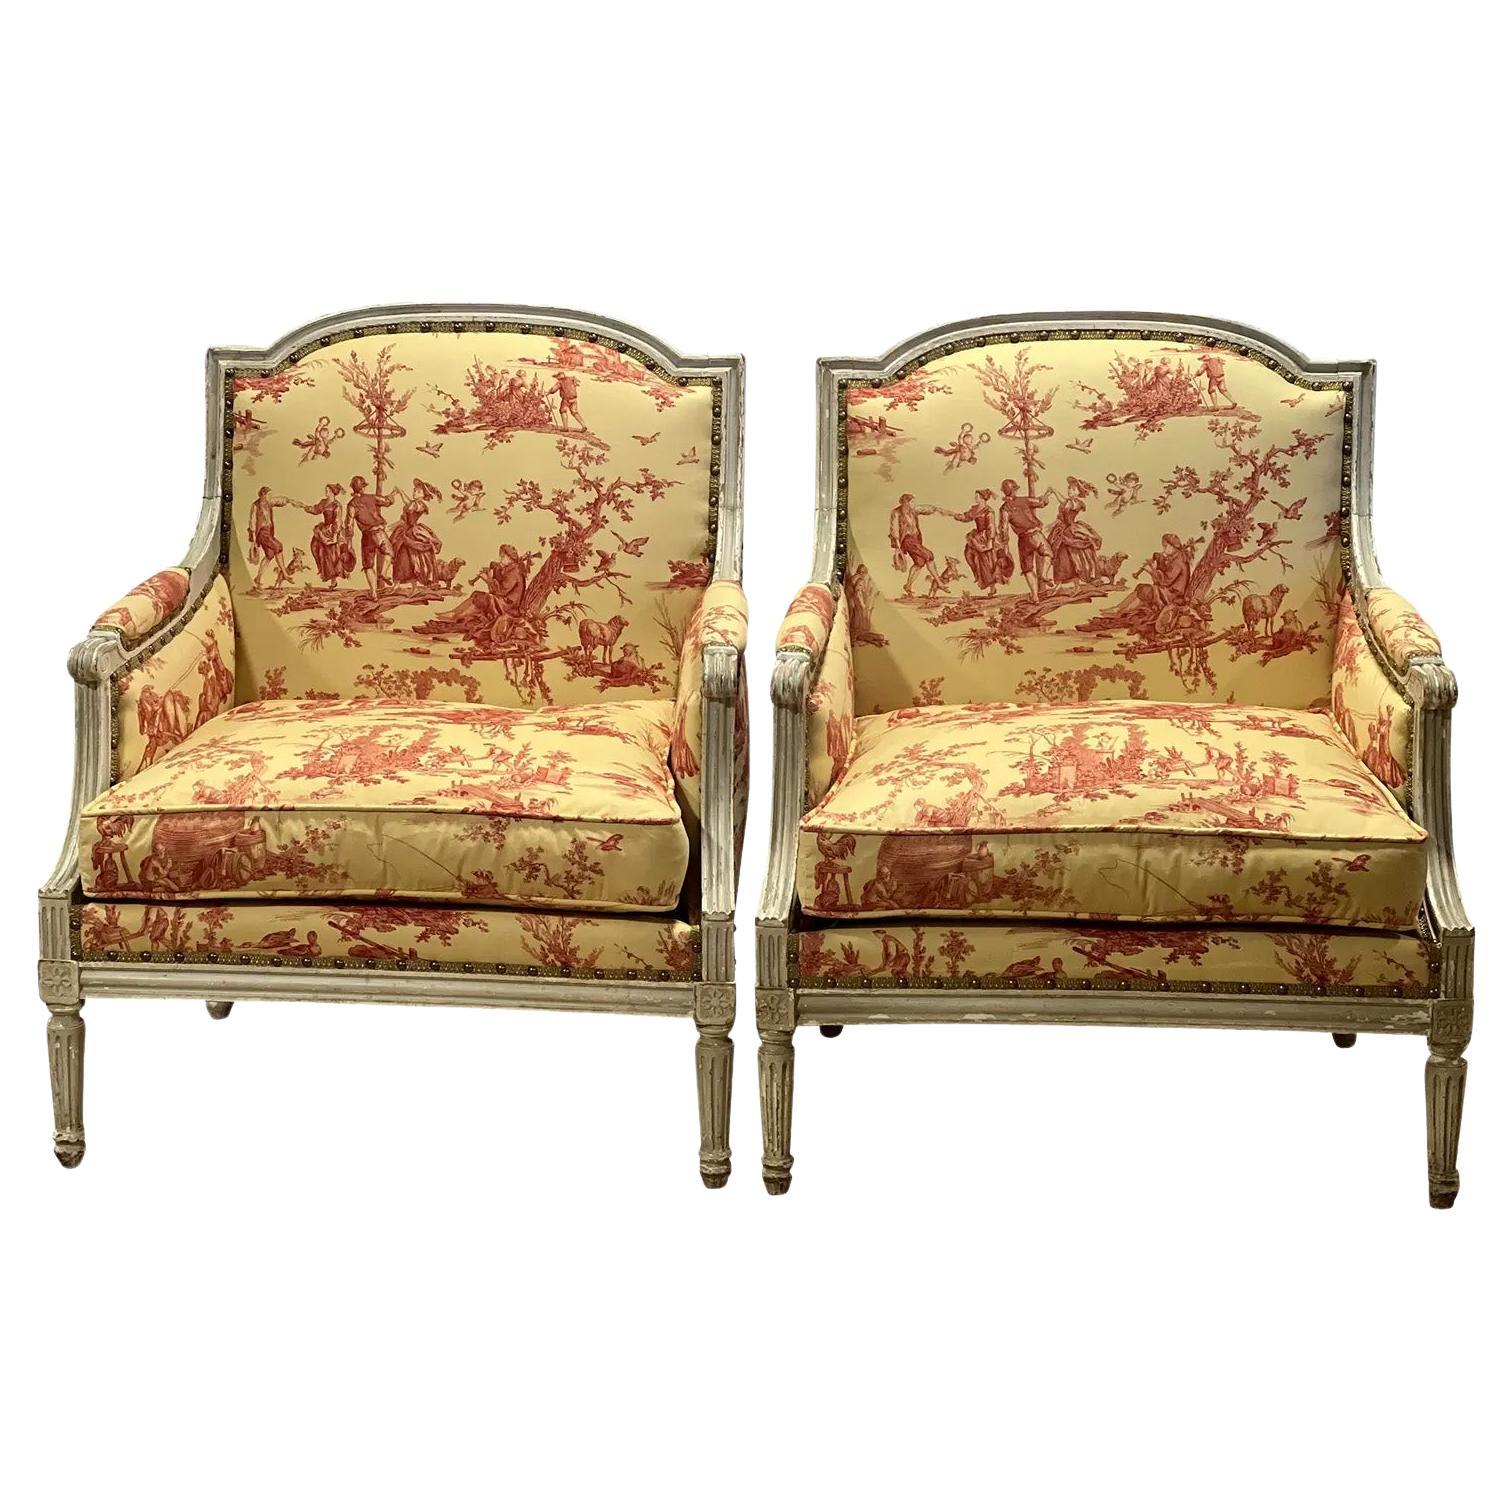 Pair of Late 19th Century Louis XVI Style French Marquis Chairs For Sale